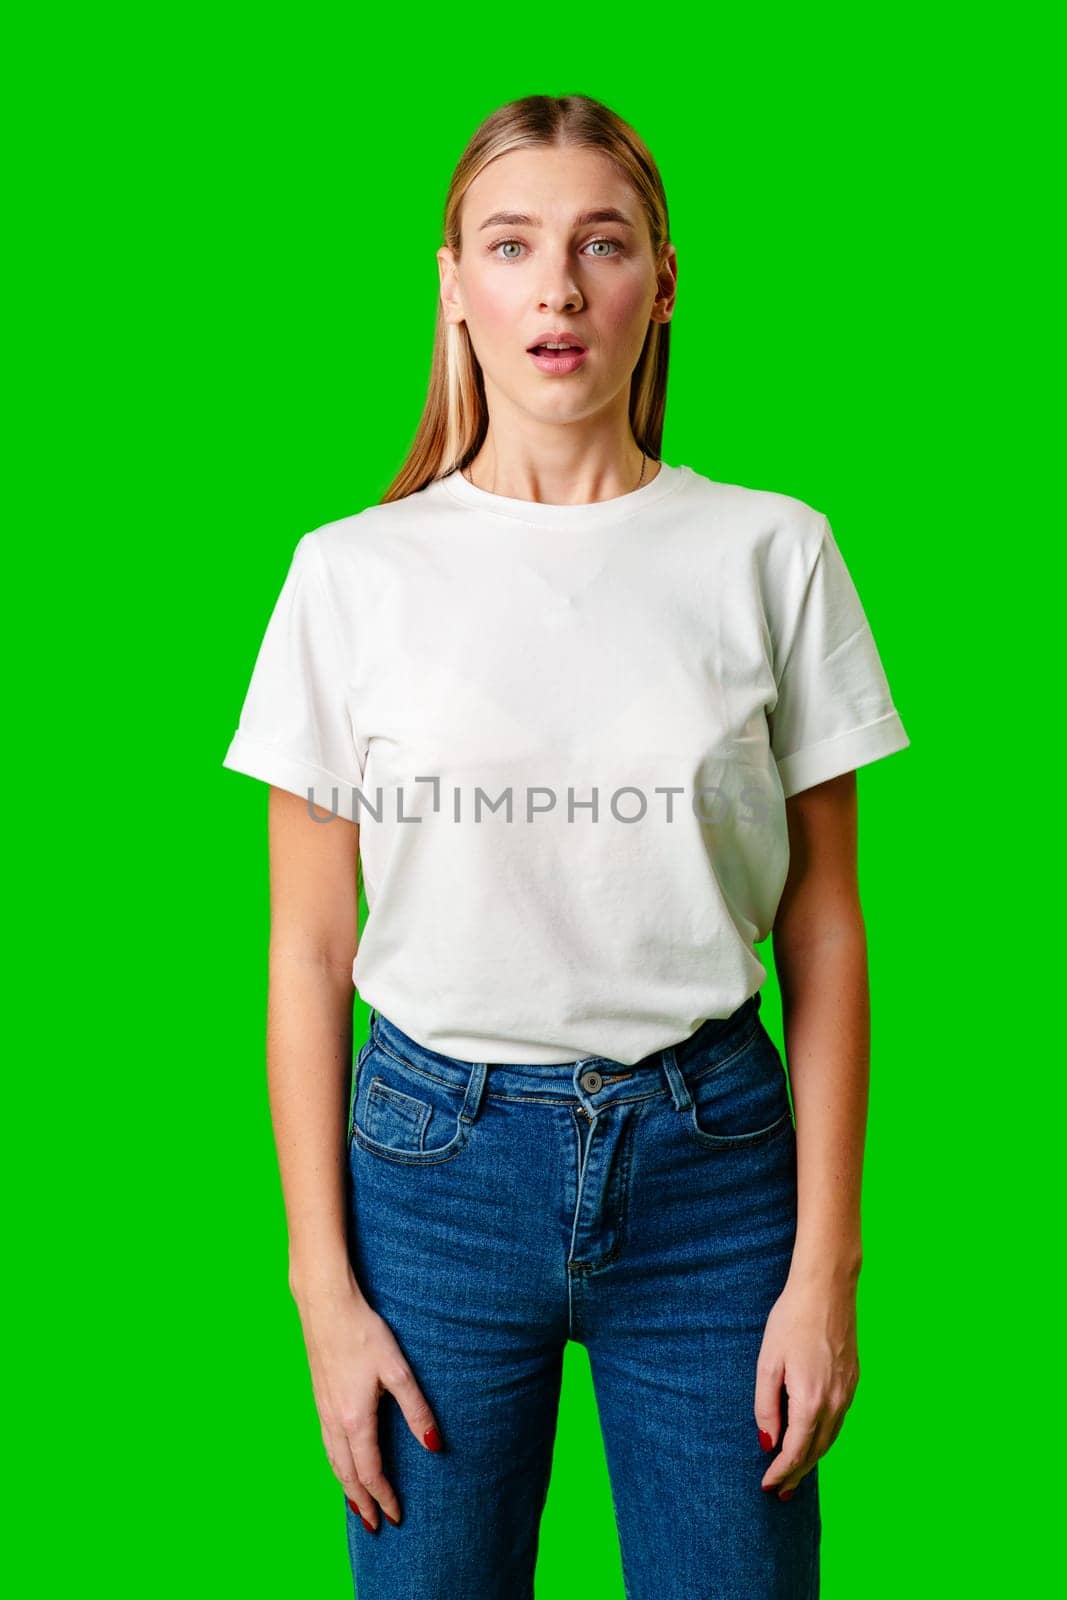 Young Woman in White T-shirt Making a Surprised Face by Fabrikasimf